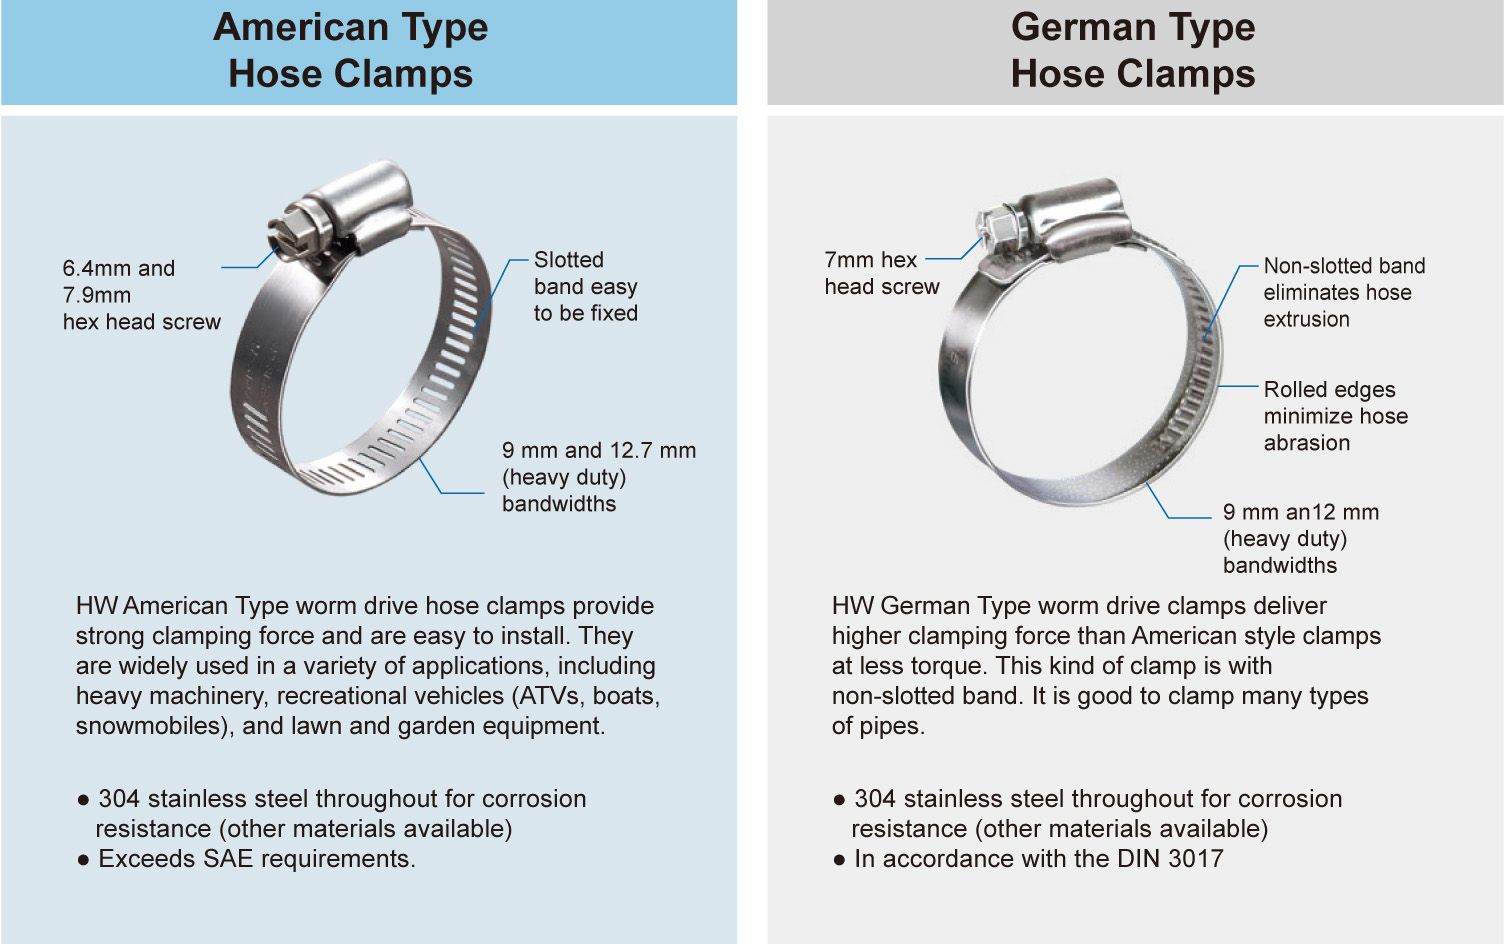 Features of American Type and German Type Hose Clamps